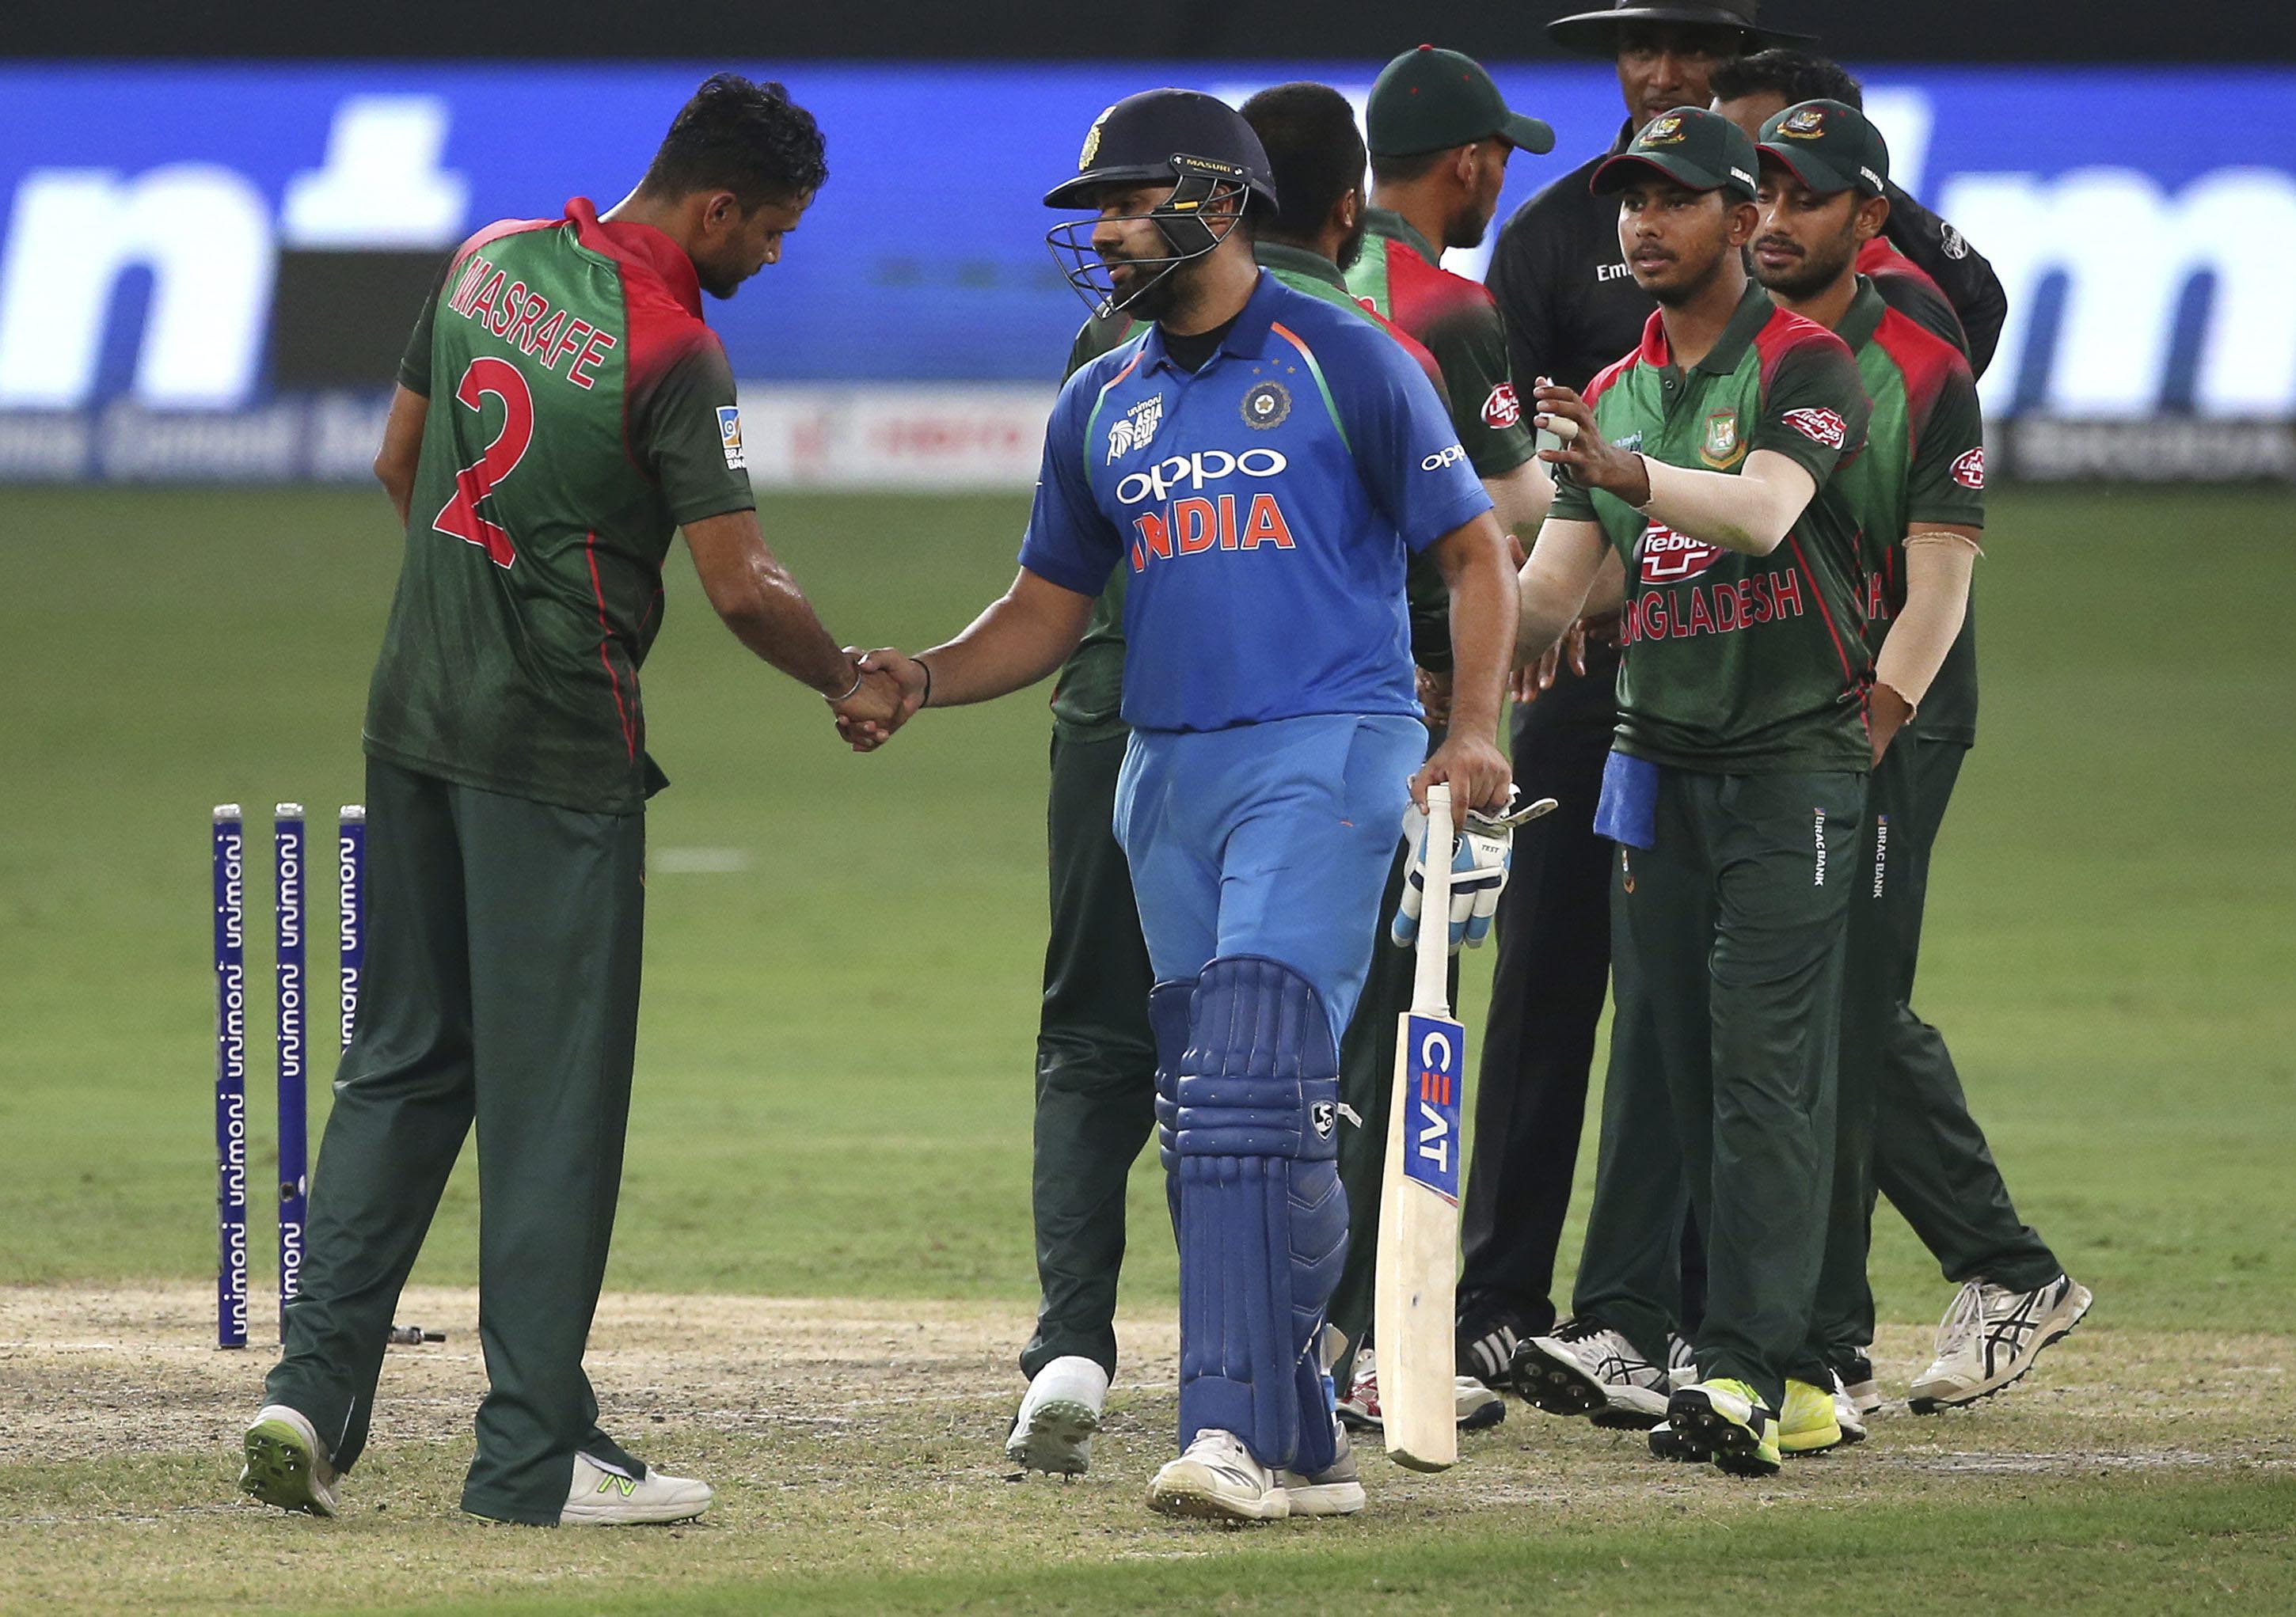 Asia Cup 2018 Hits and misses during India's win against Bangladesh